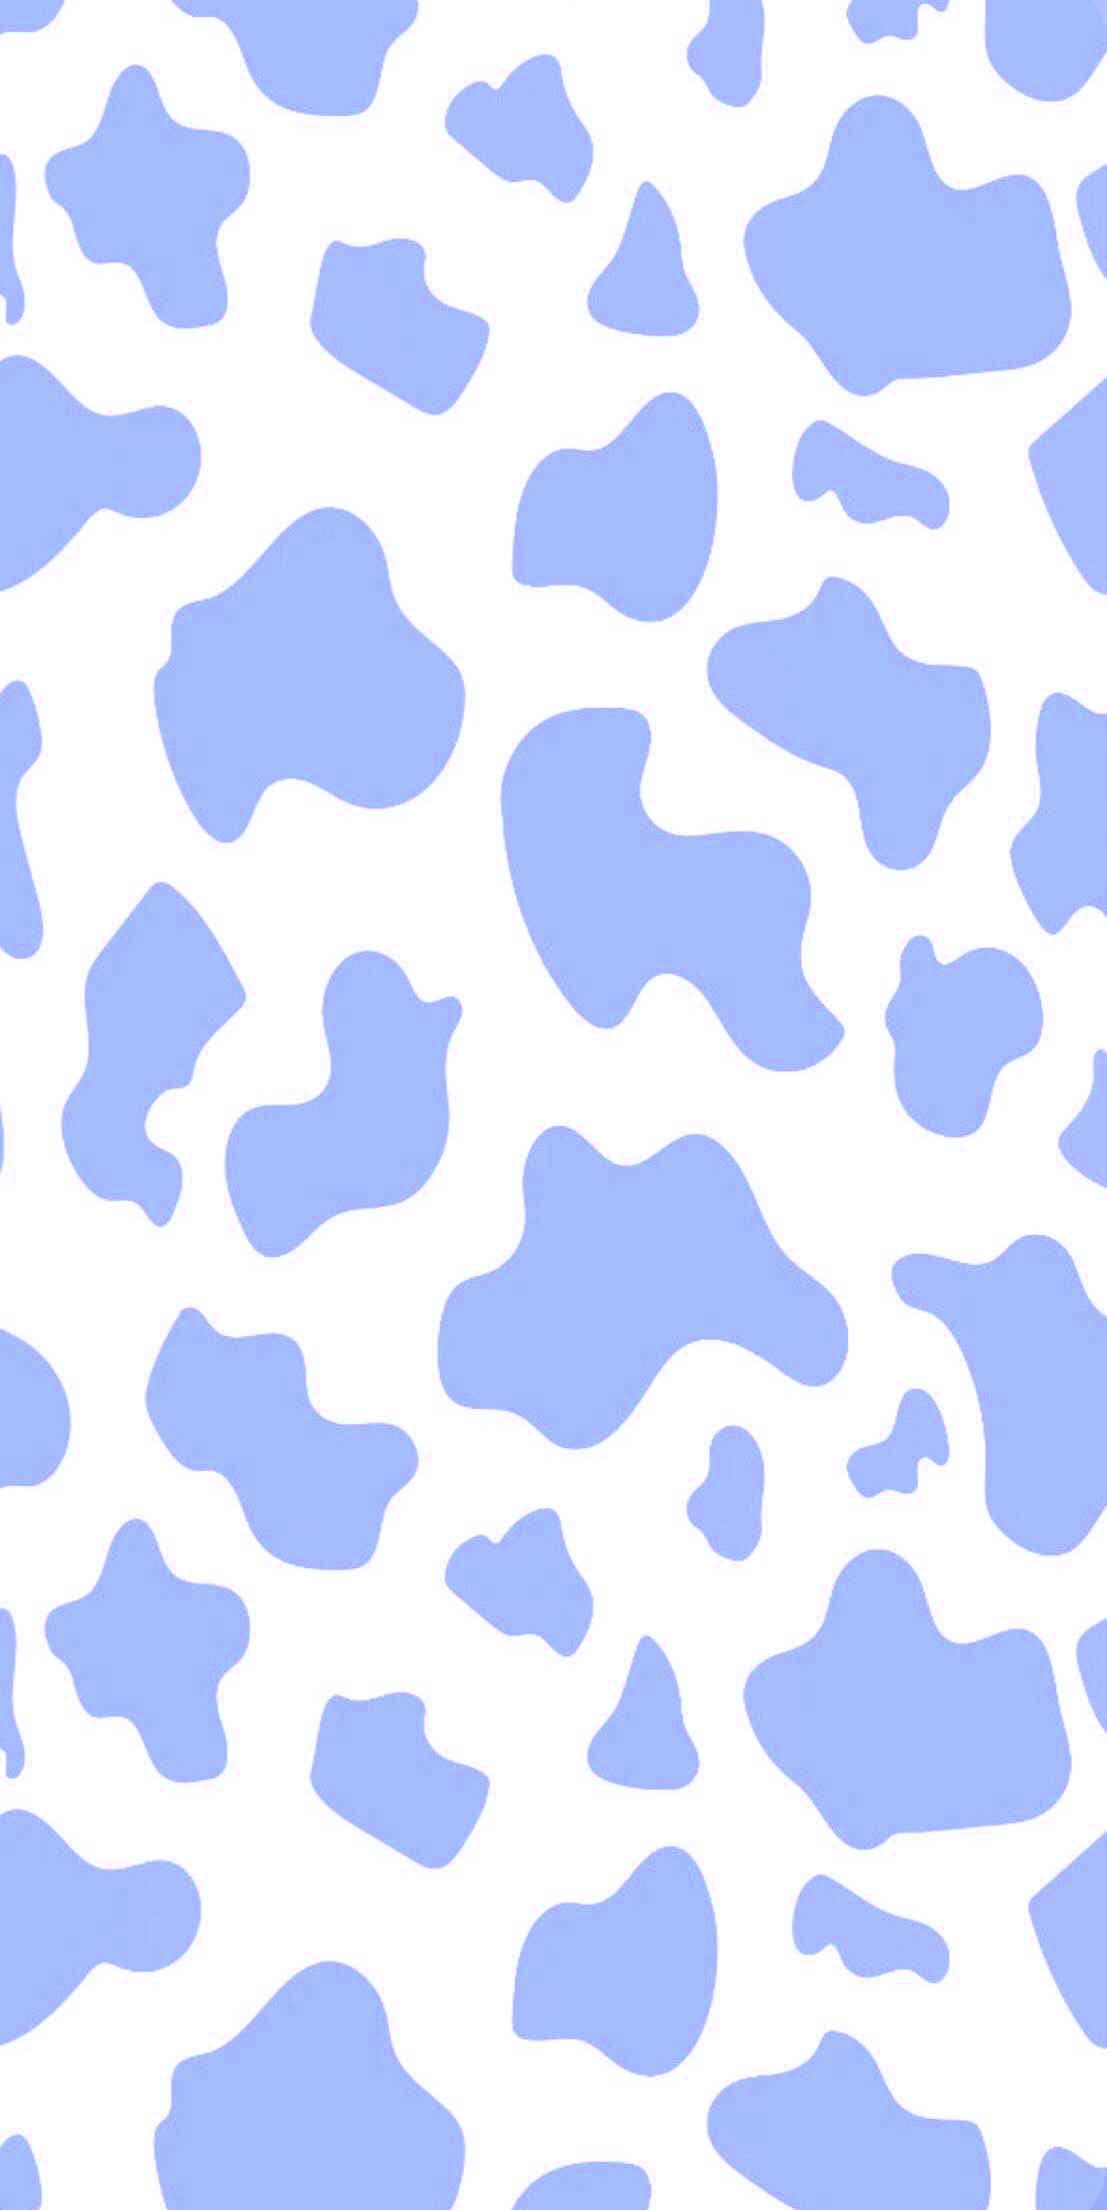 Top 999 Cow Print Wallpaper Full HD 4KFree to Use